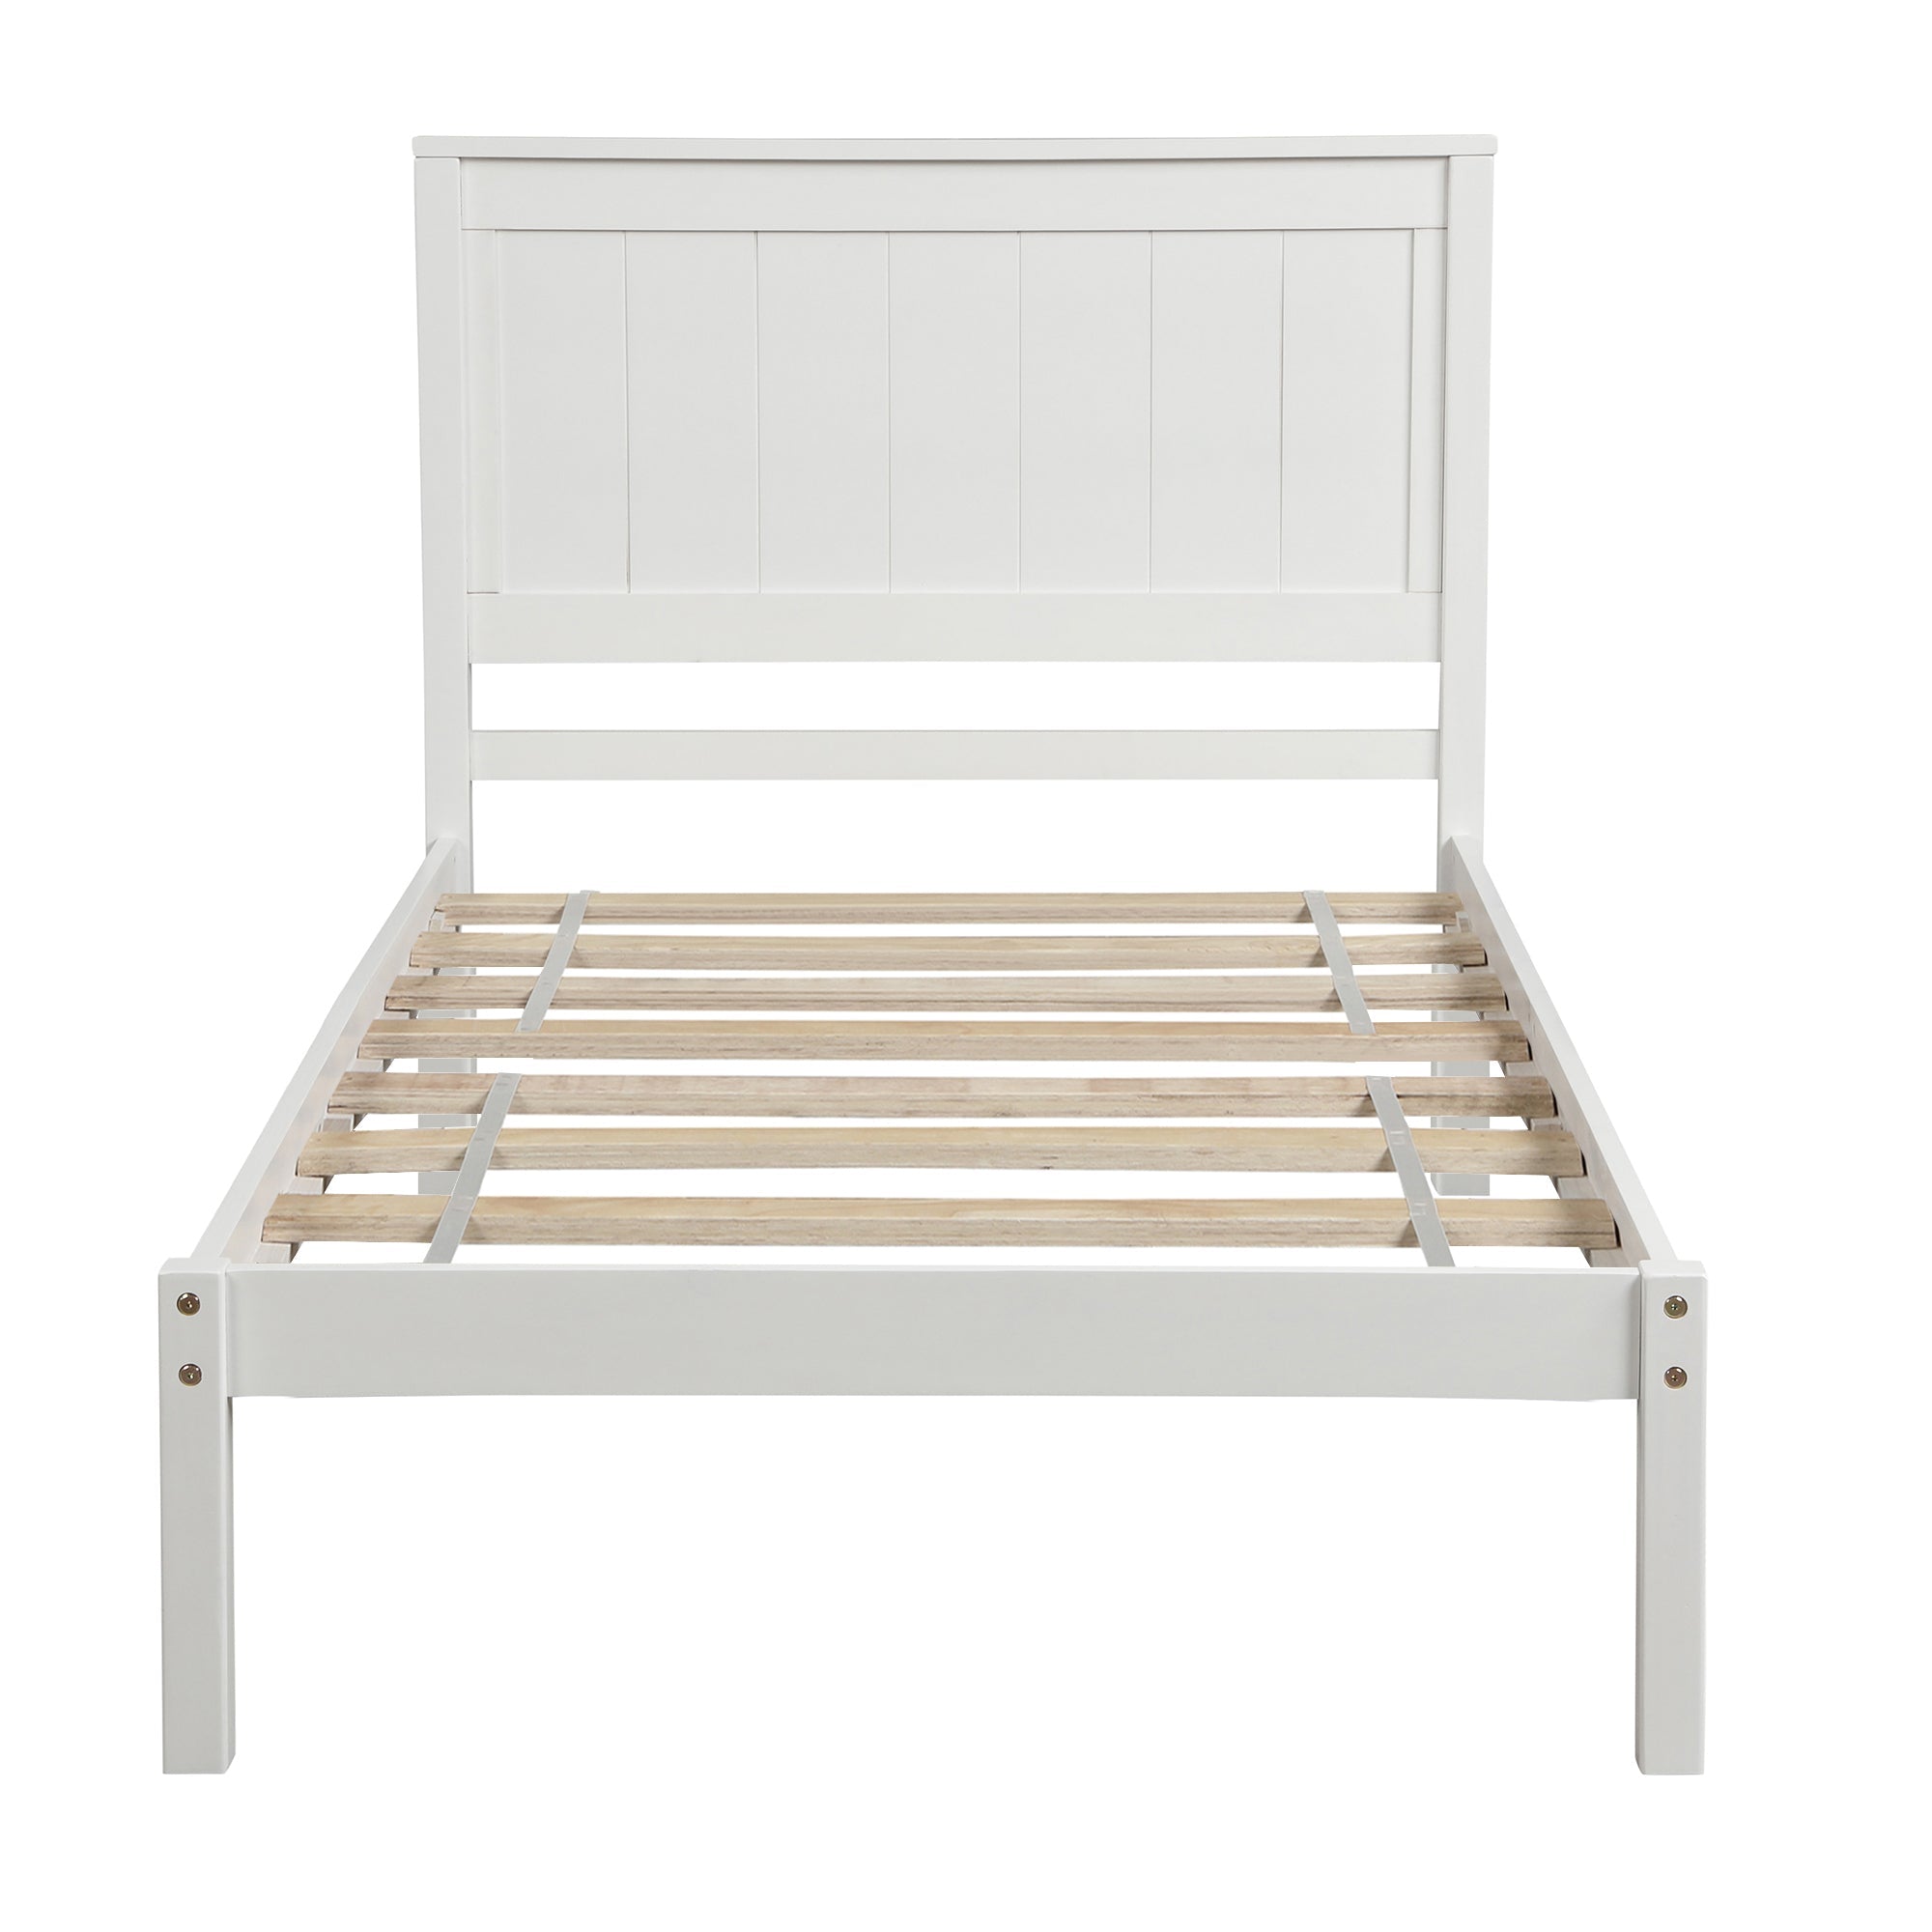 Platform Bed Frame with Headboard | Wood Slat Support | No Box Spring Needed | Twin Size | White Finish